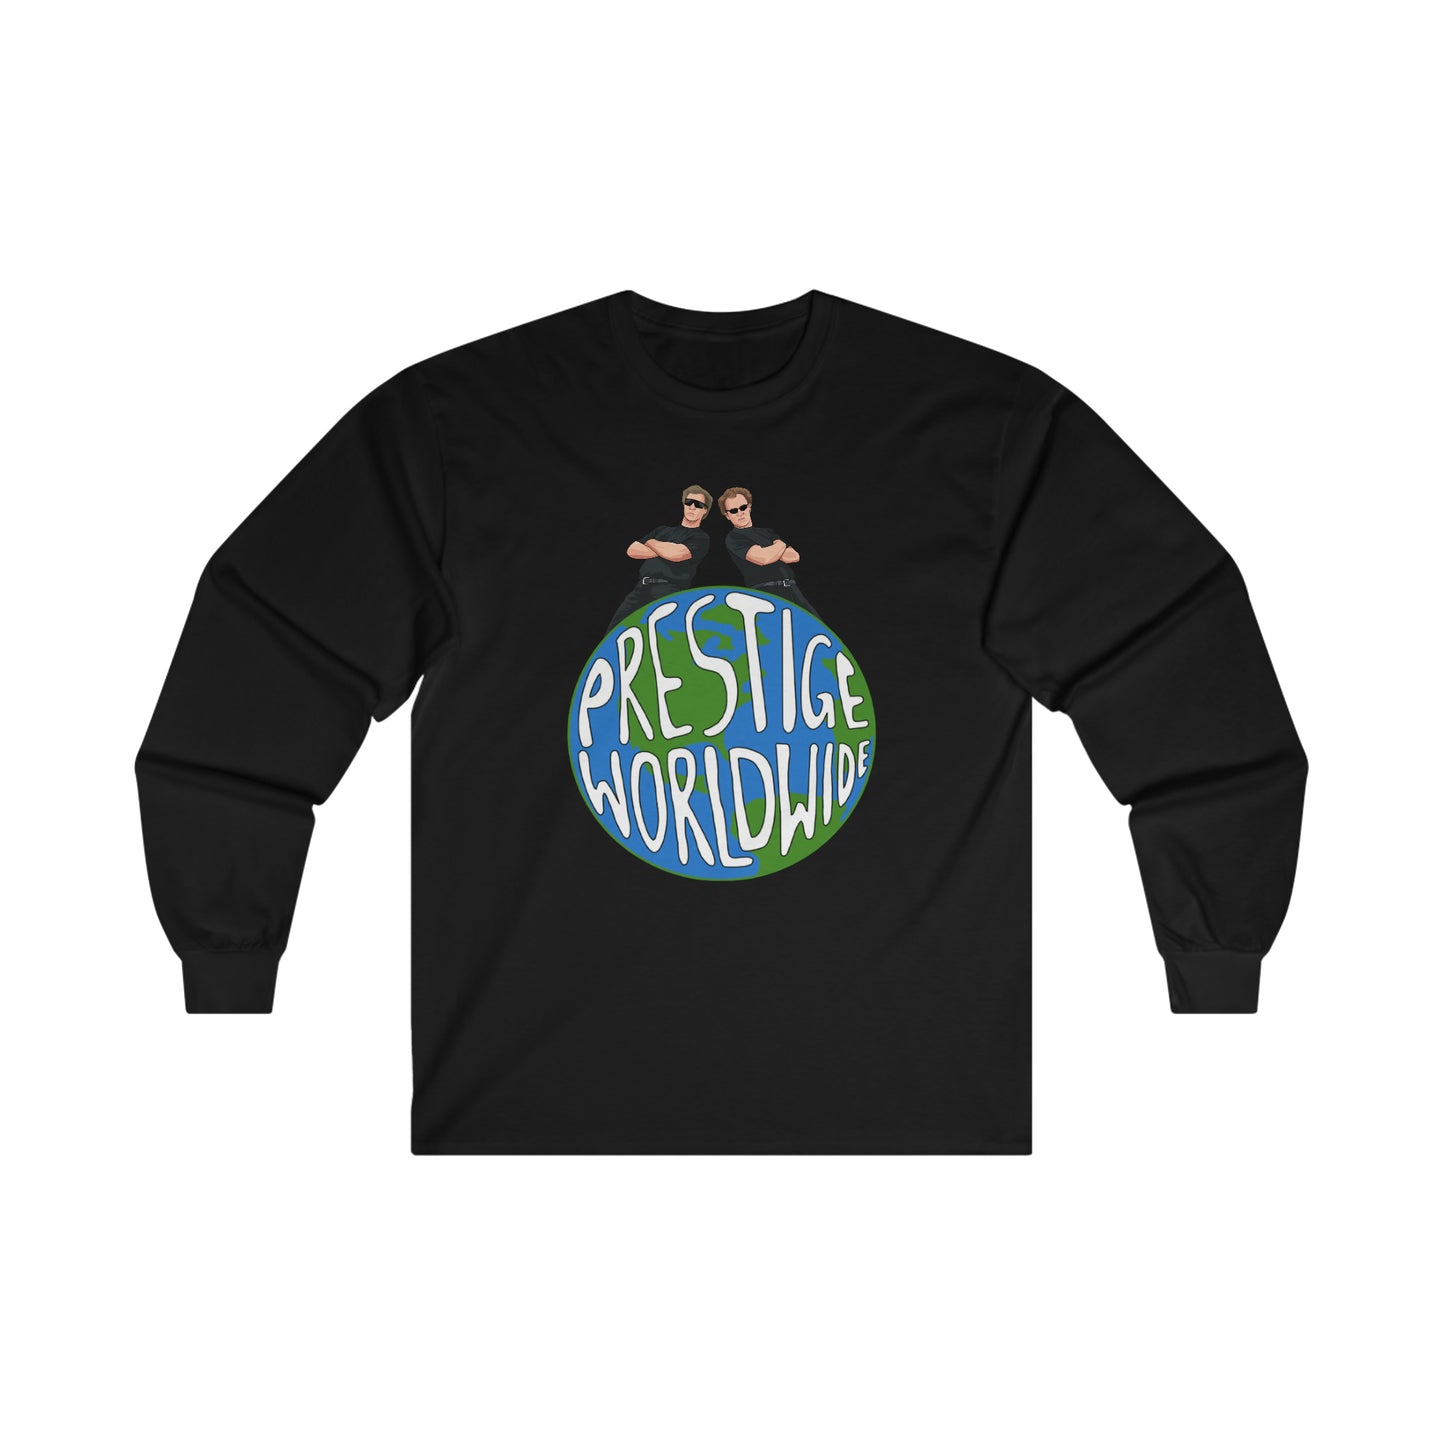 Step Brothers - Prestige Worldwide - Ultra Cotton Long Sleeve Tee - All Colors